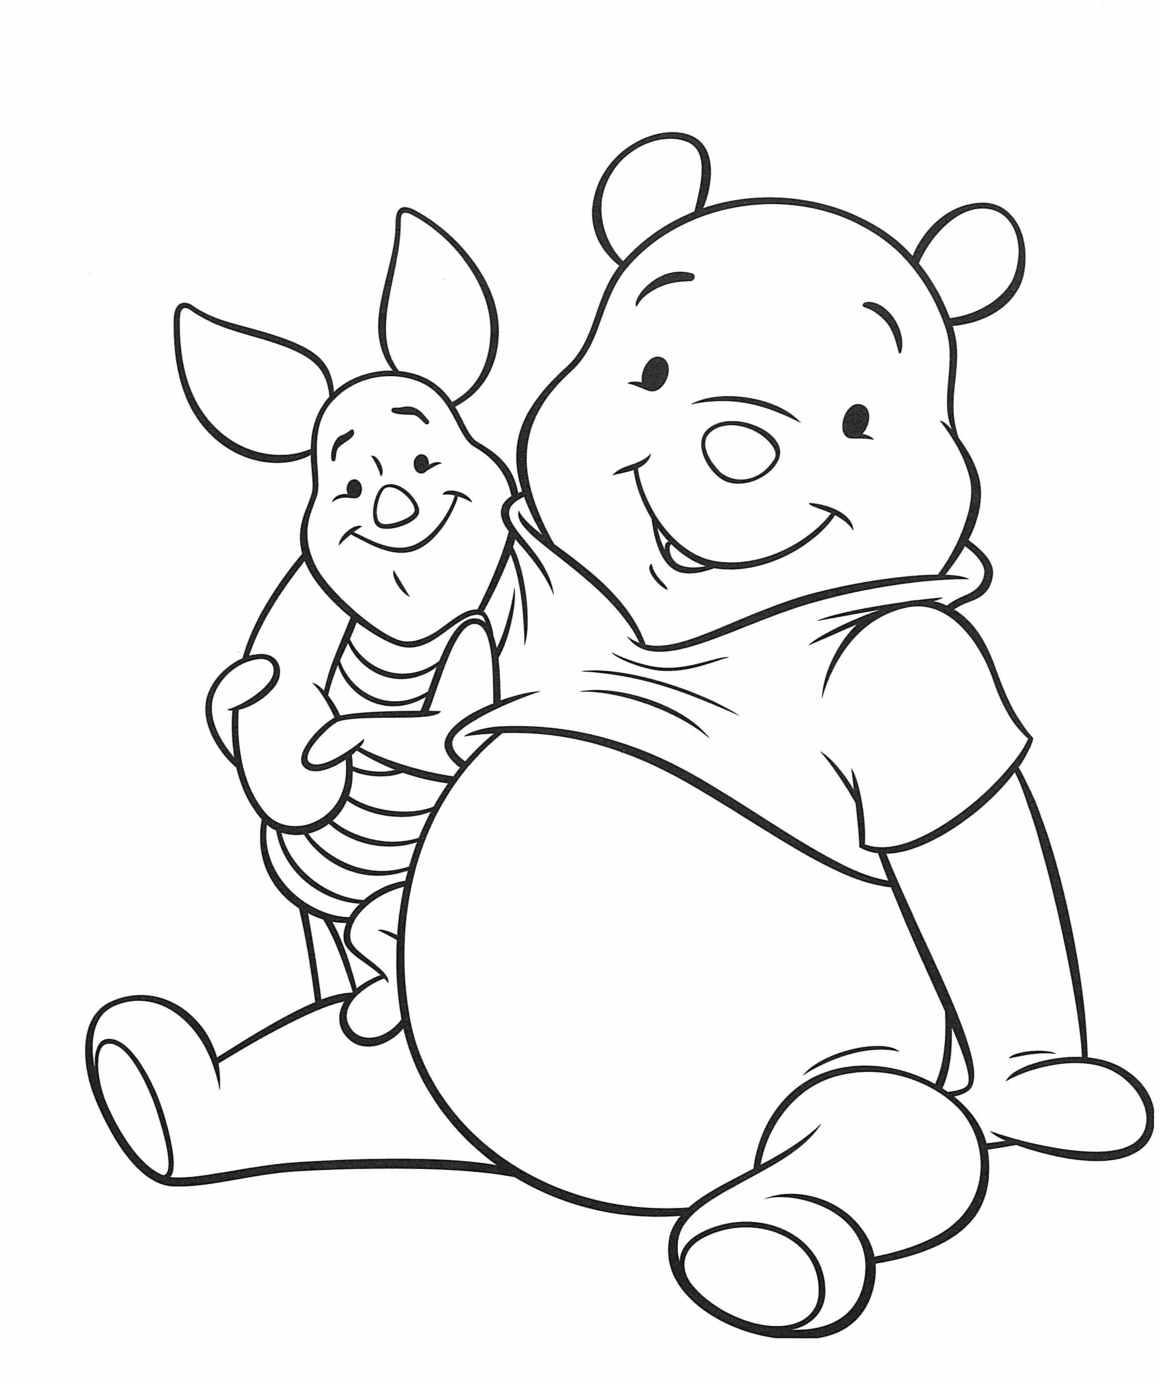 Winnie the pooh, Colouring pages and Silhouette